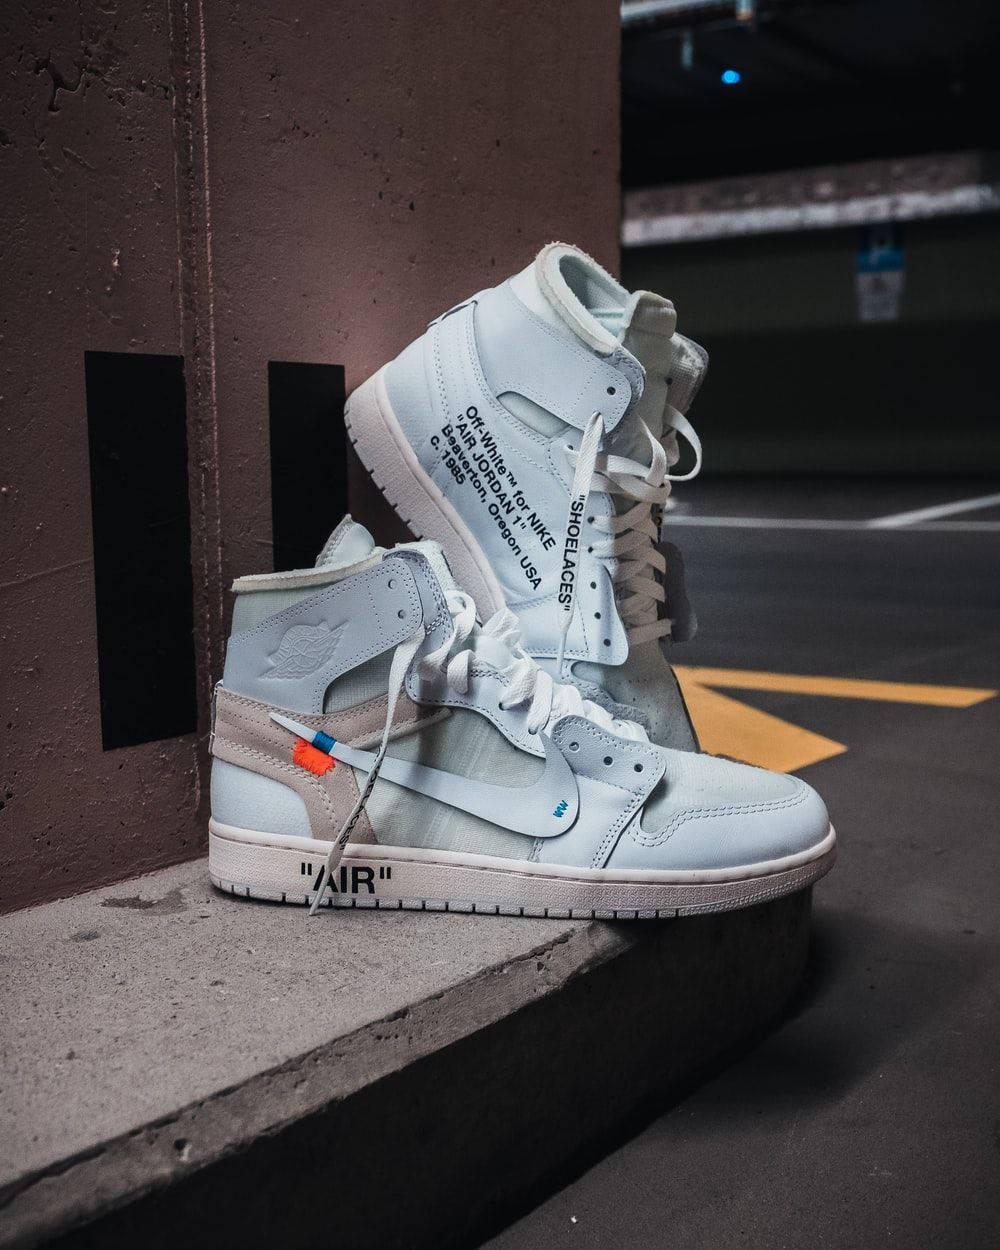 Download A Pair Of White Air Jordan 1 High Sneakers Sitting On A ...